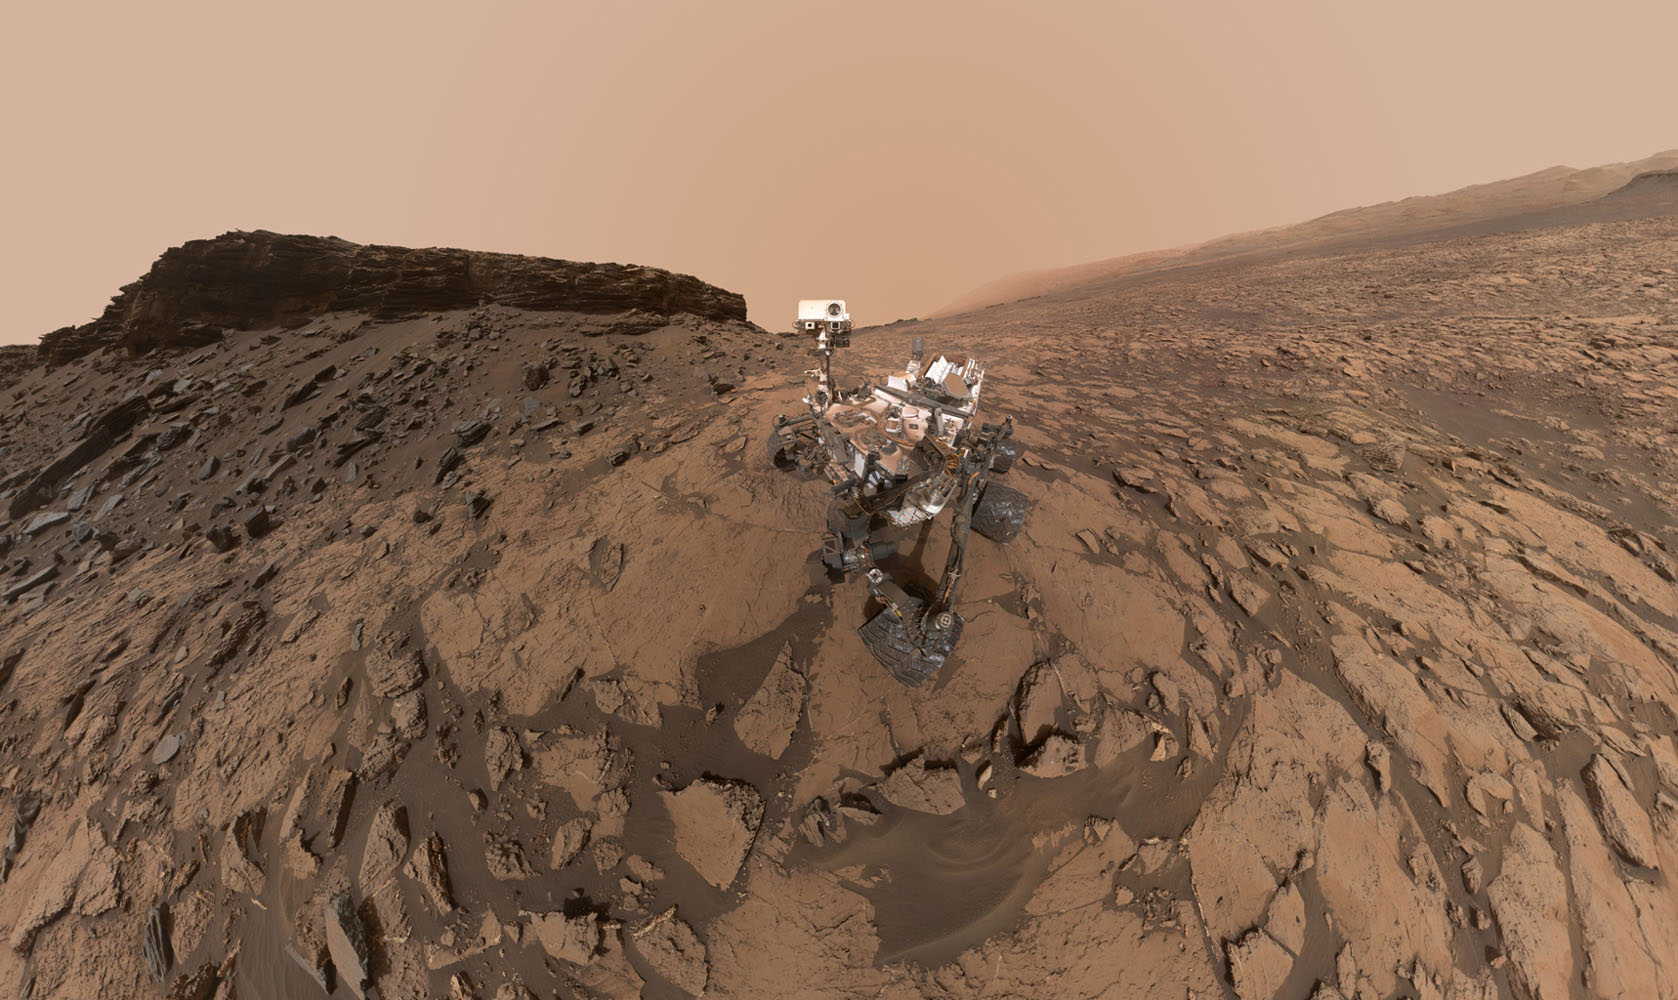 A "self-portrait" of Curiosity at the Quela drilling location at the base of one of the buttes in Murray Buttes. Image Credit: NASA/JPL-Caltech/MSSS